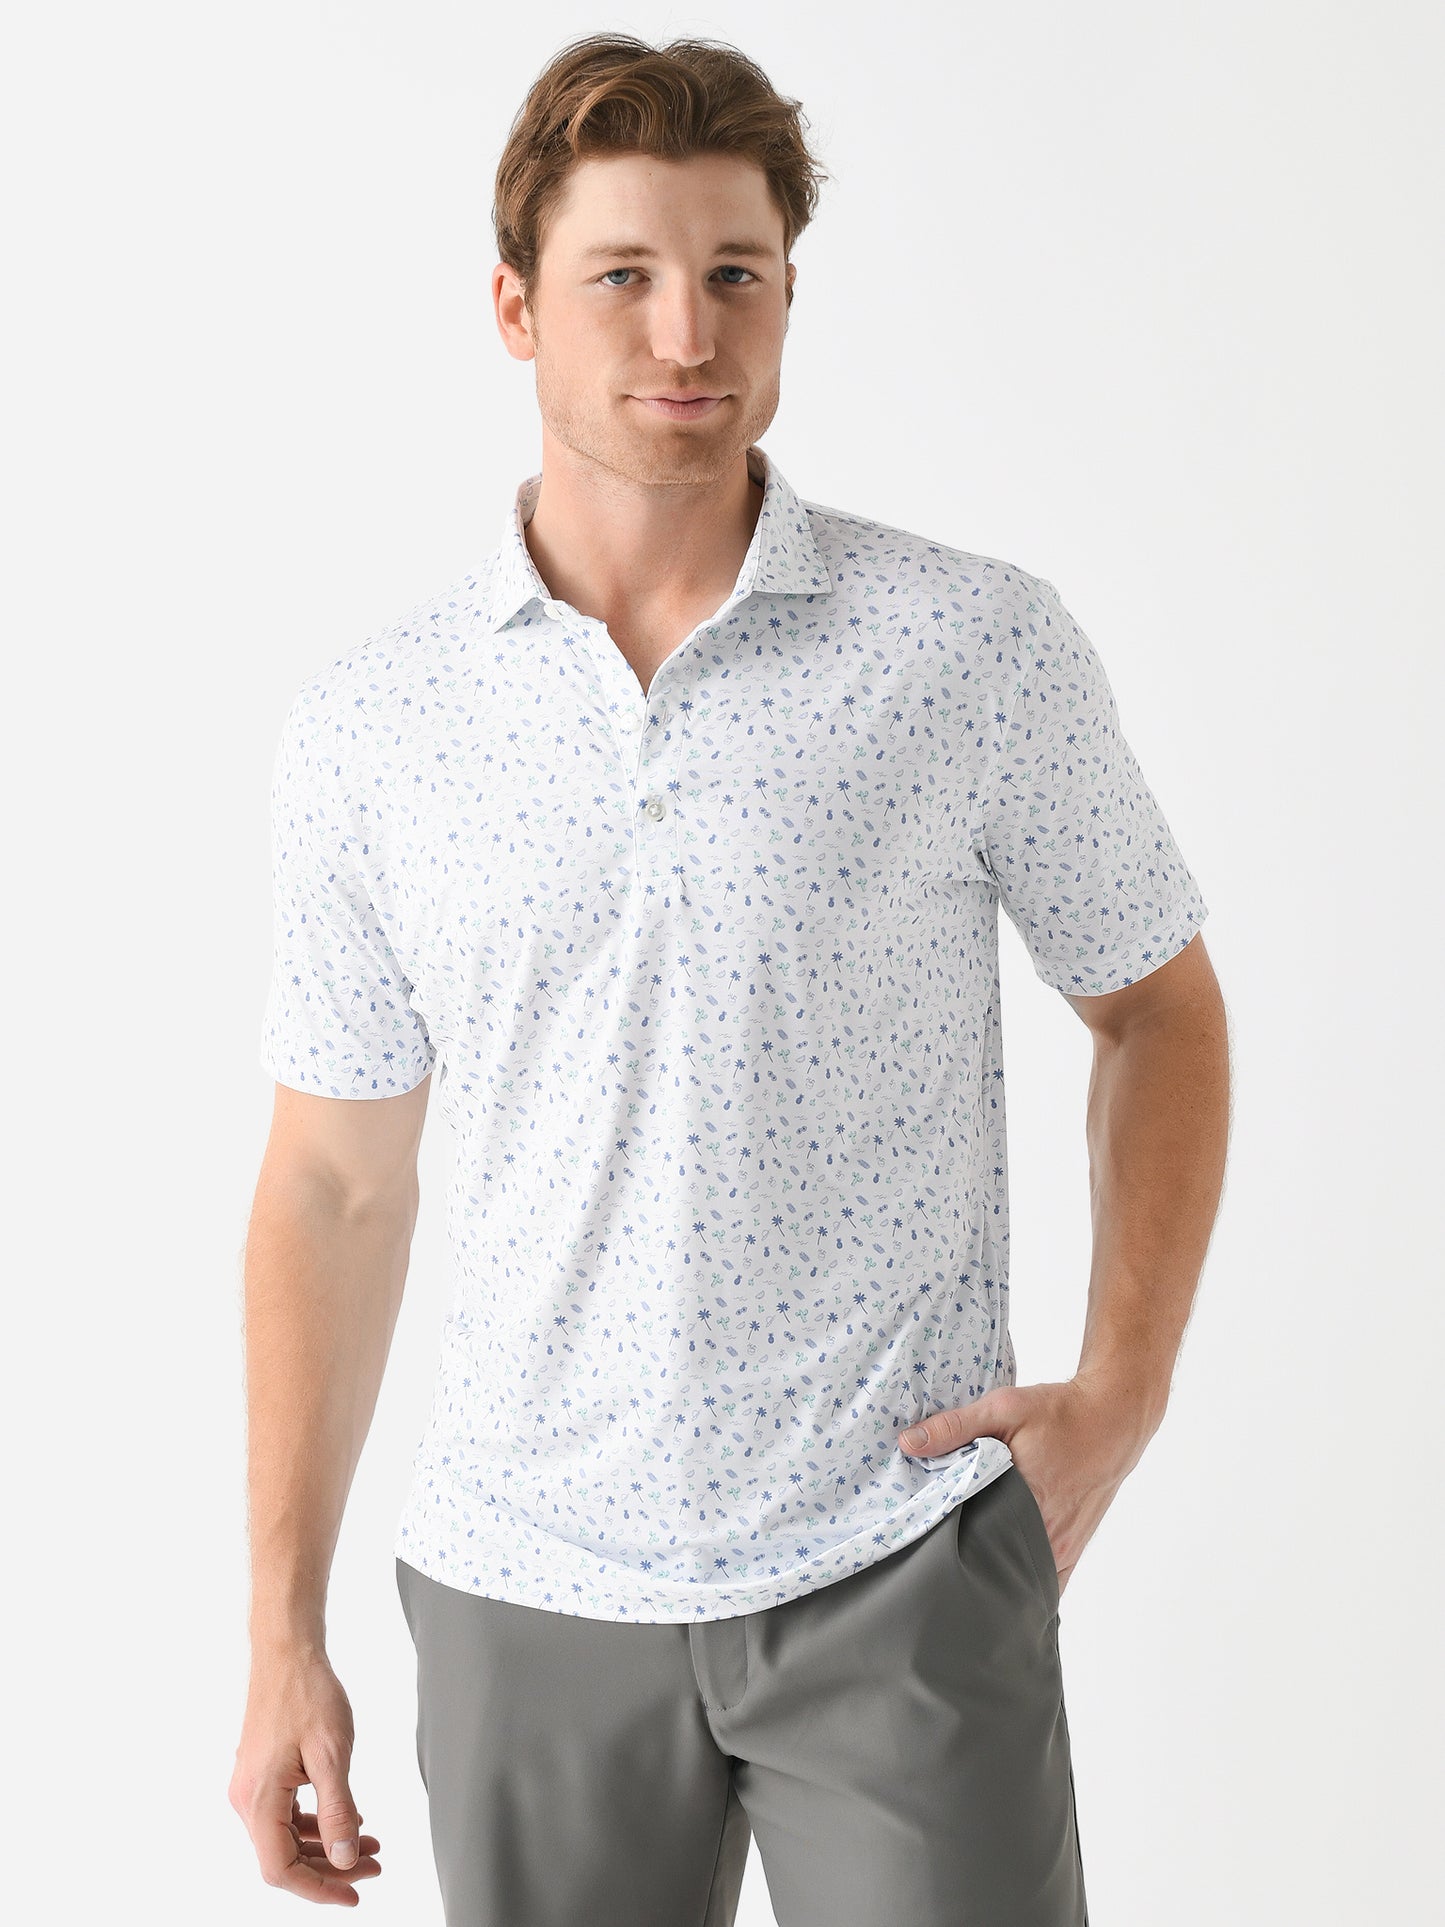 Johnnie-O Men's Oceano Printed Featherweight Performance Polo